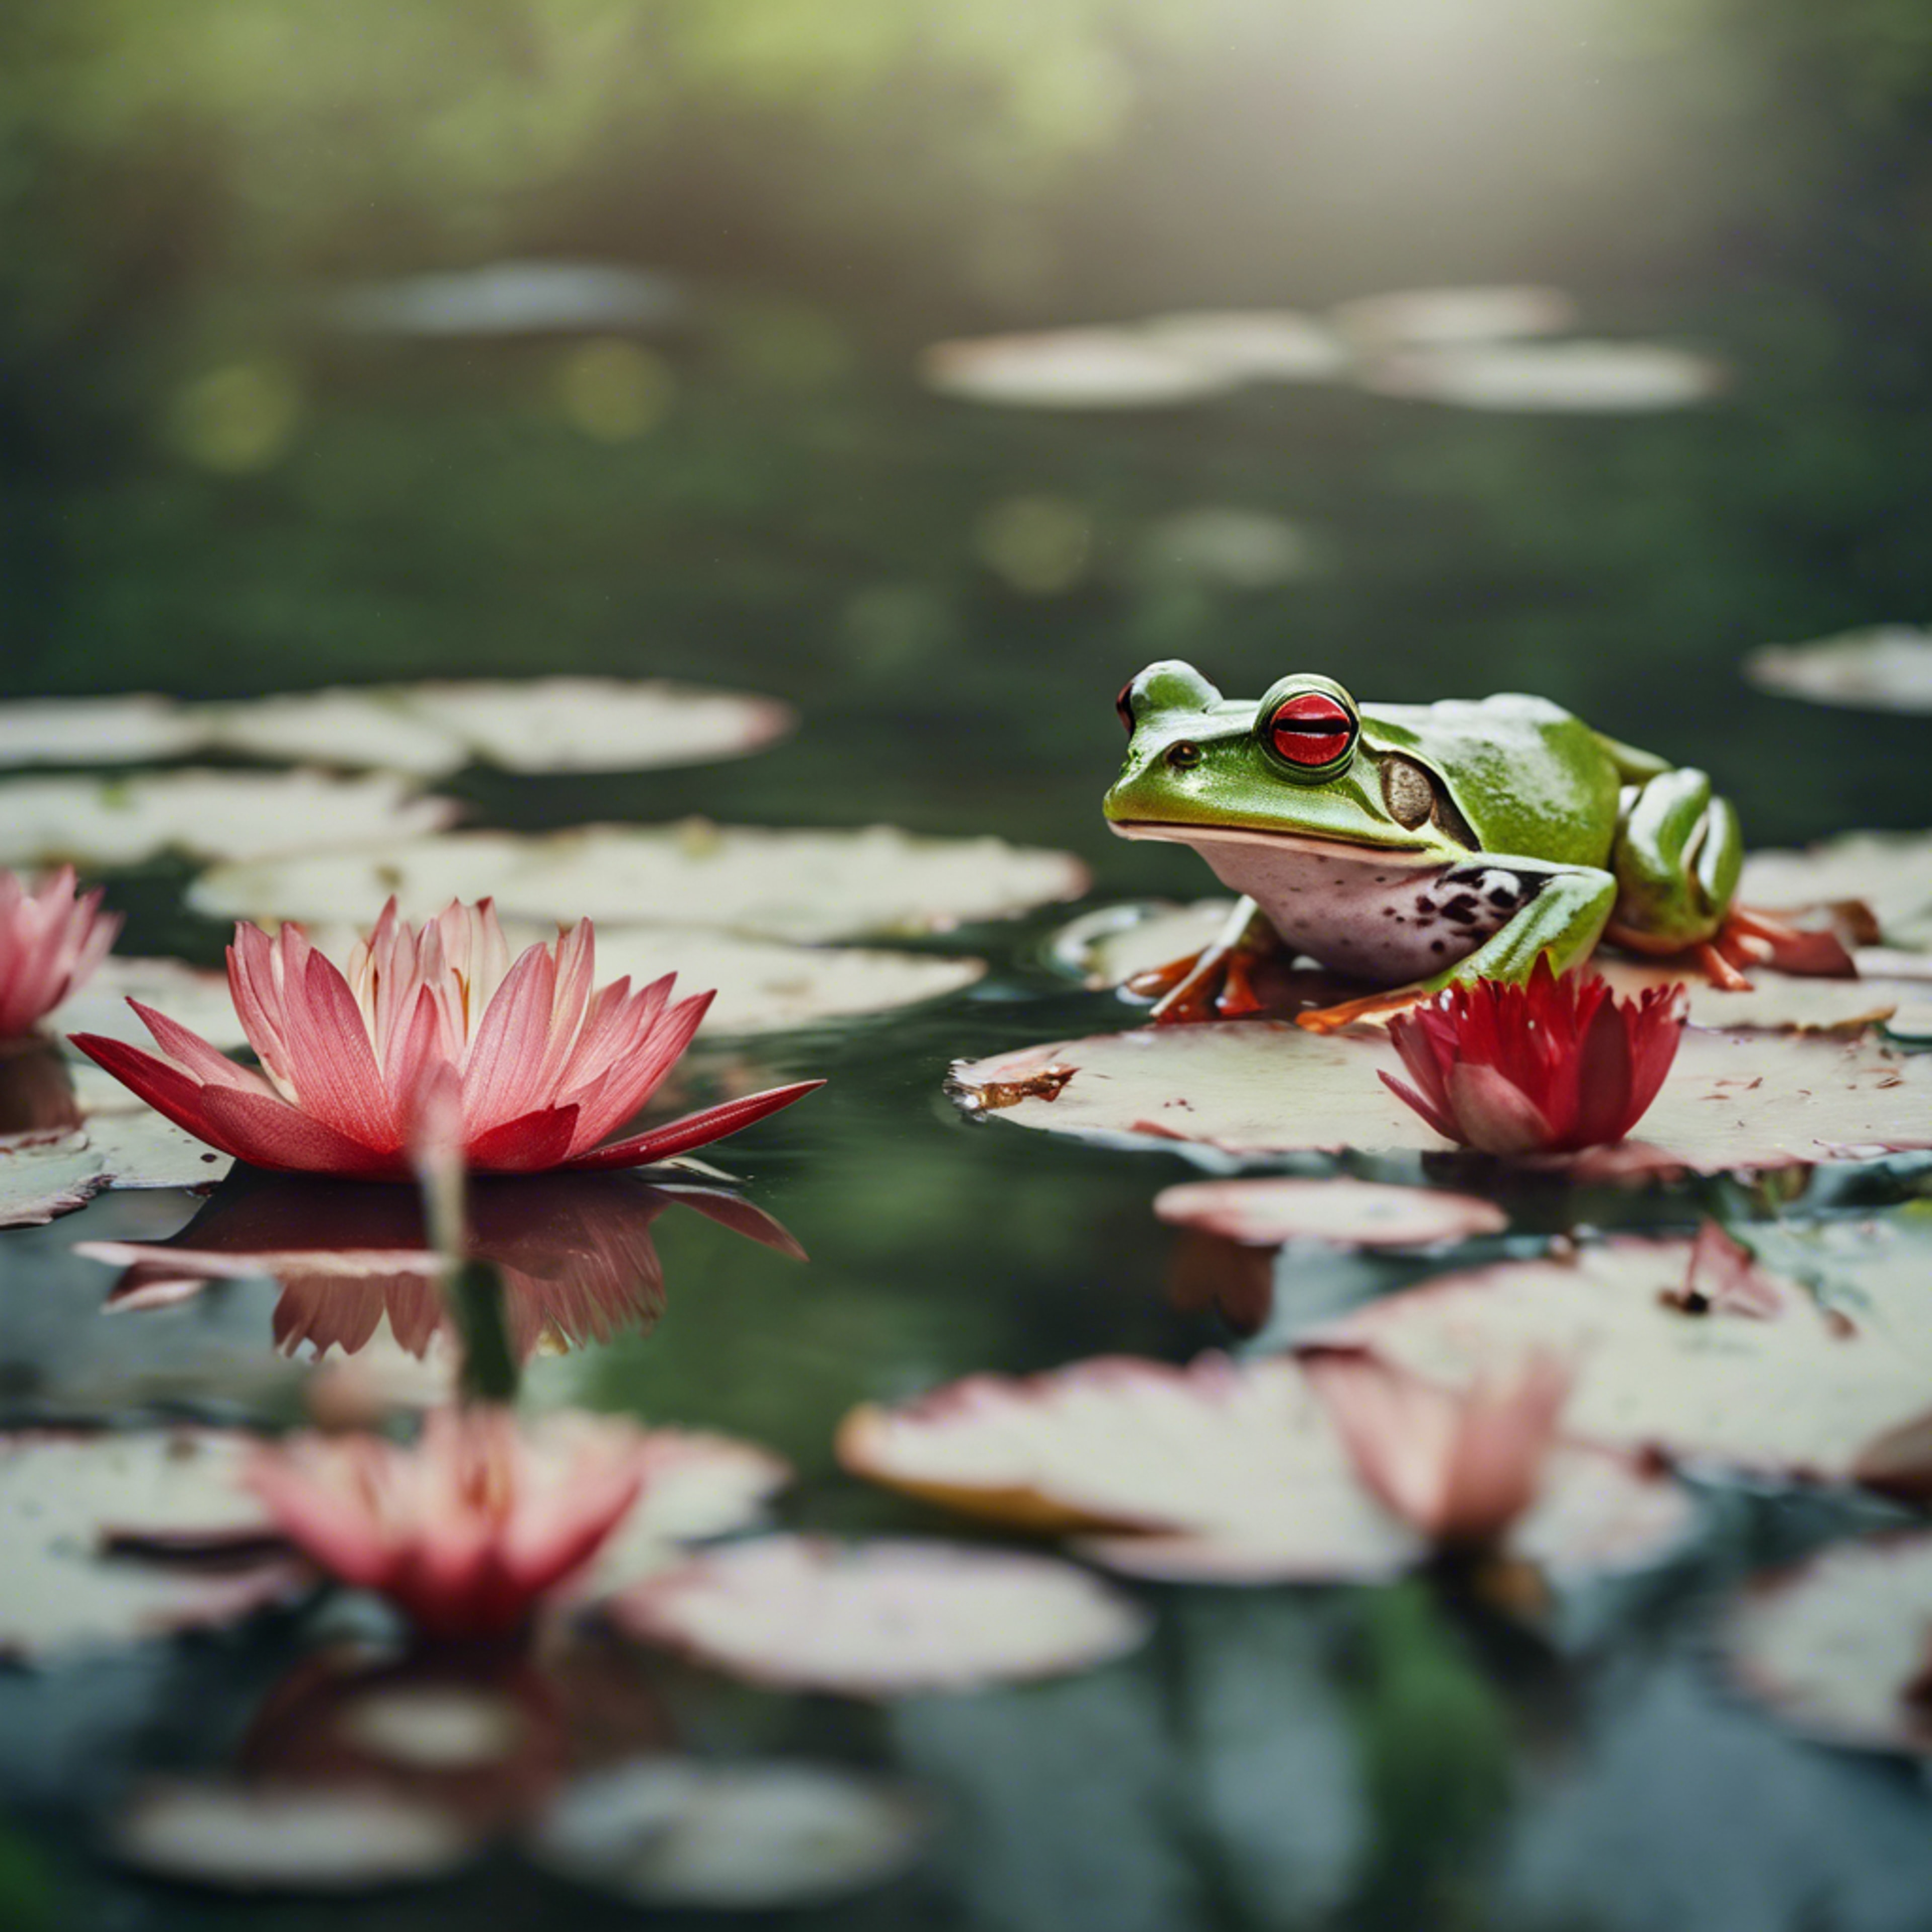 A green frog with unique red spots on its back resting amongst lily pads Fondo de pantalla[ede852334745430fb604]